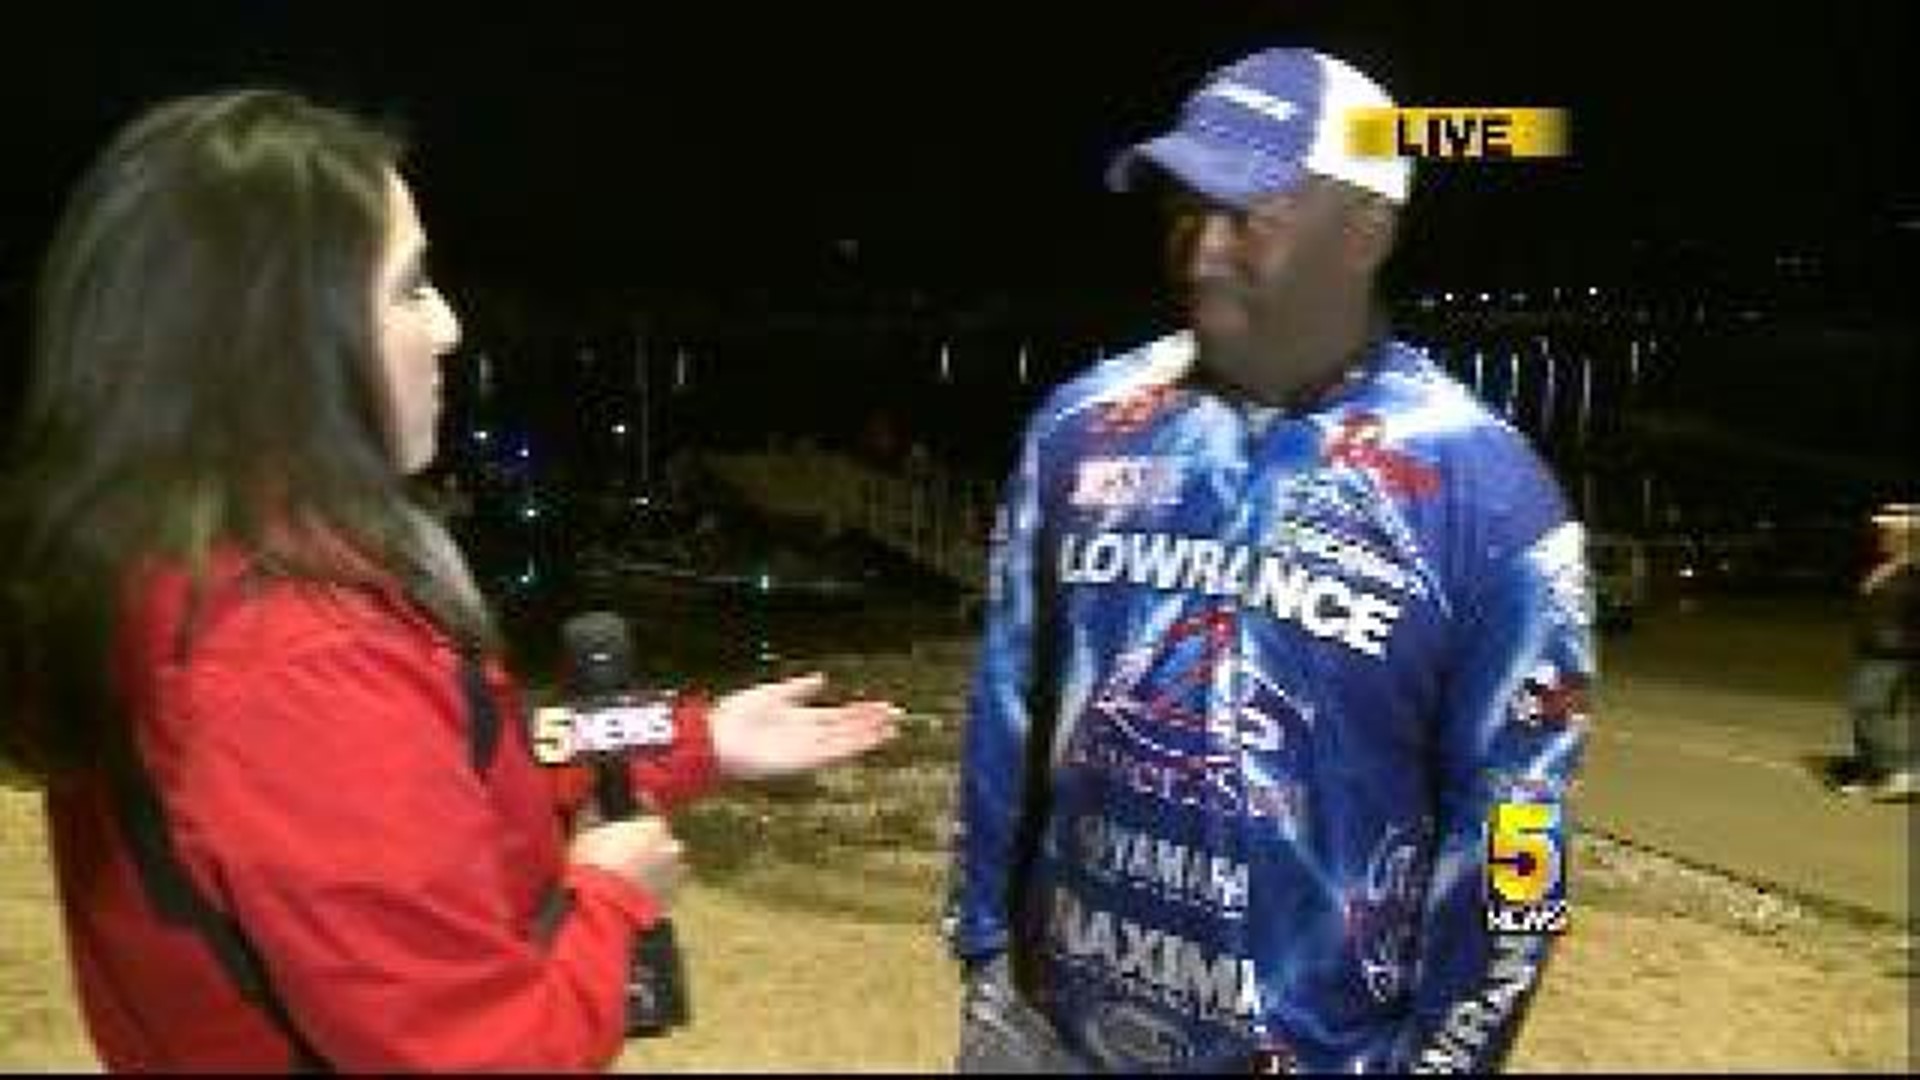 Pro-Angler From California Talks Opening Day